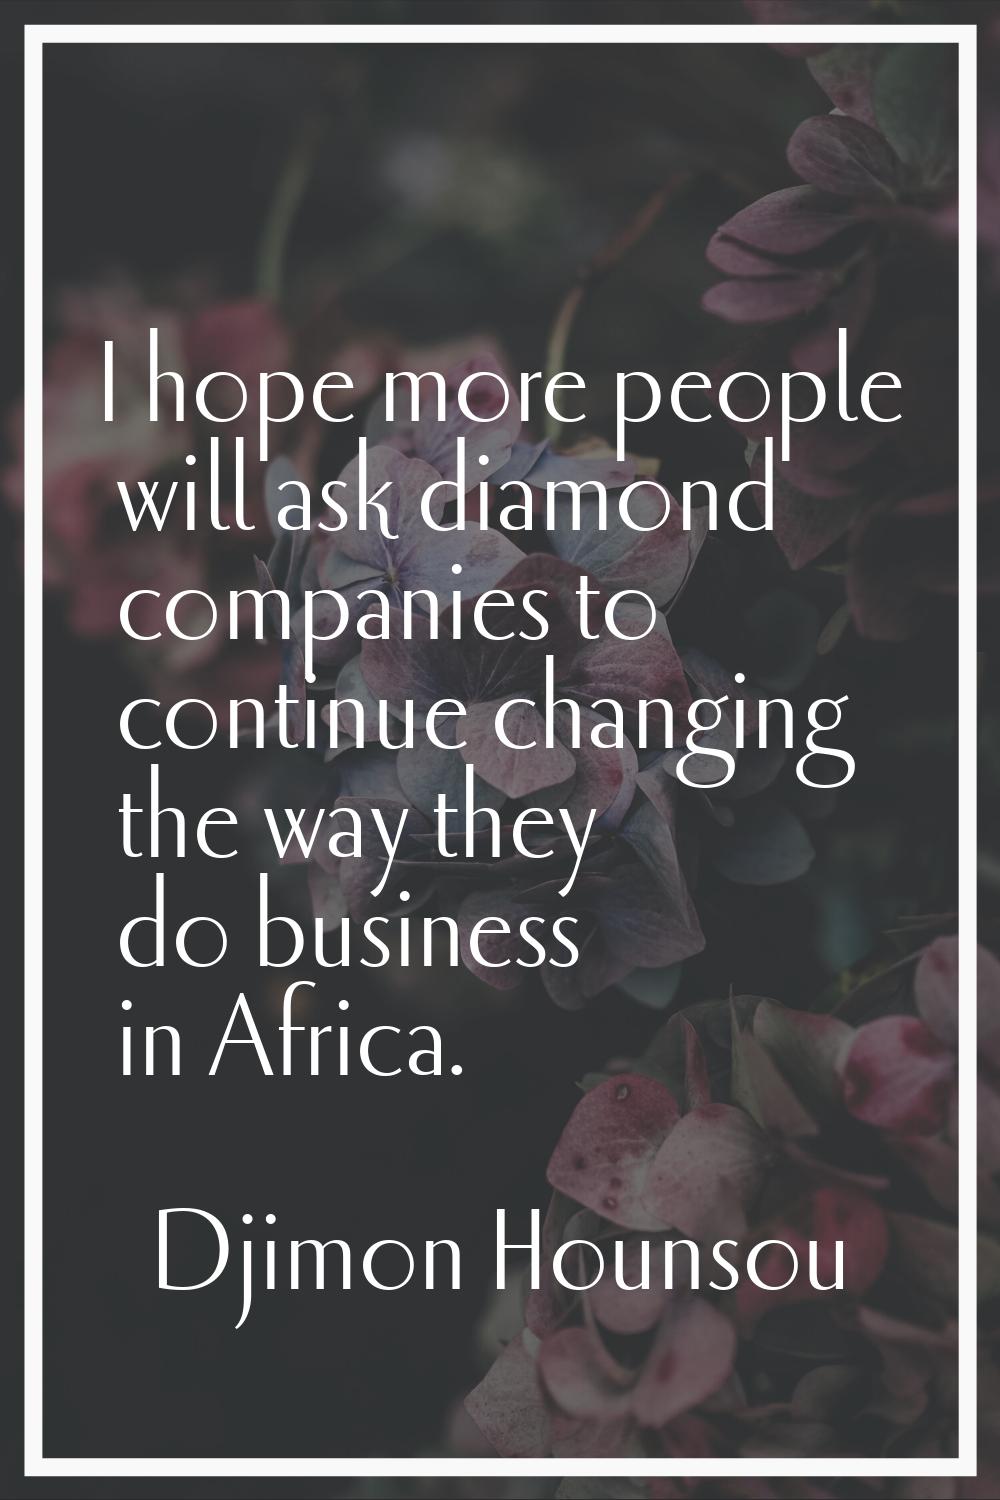 I hope more people will ask diamond companies to continue changing the way they do business in Afri